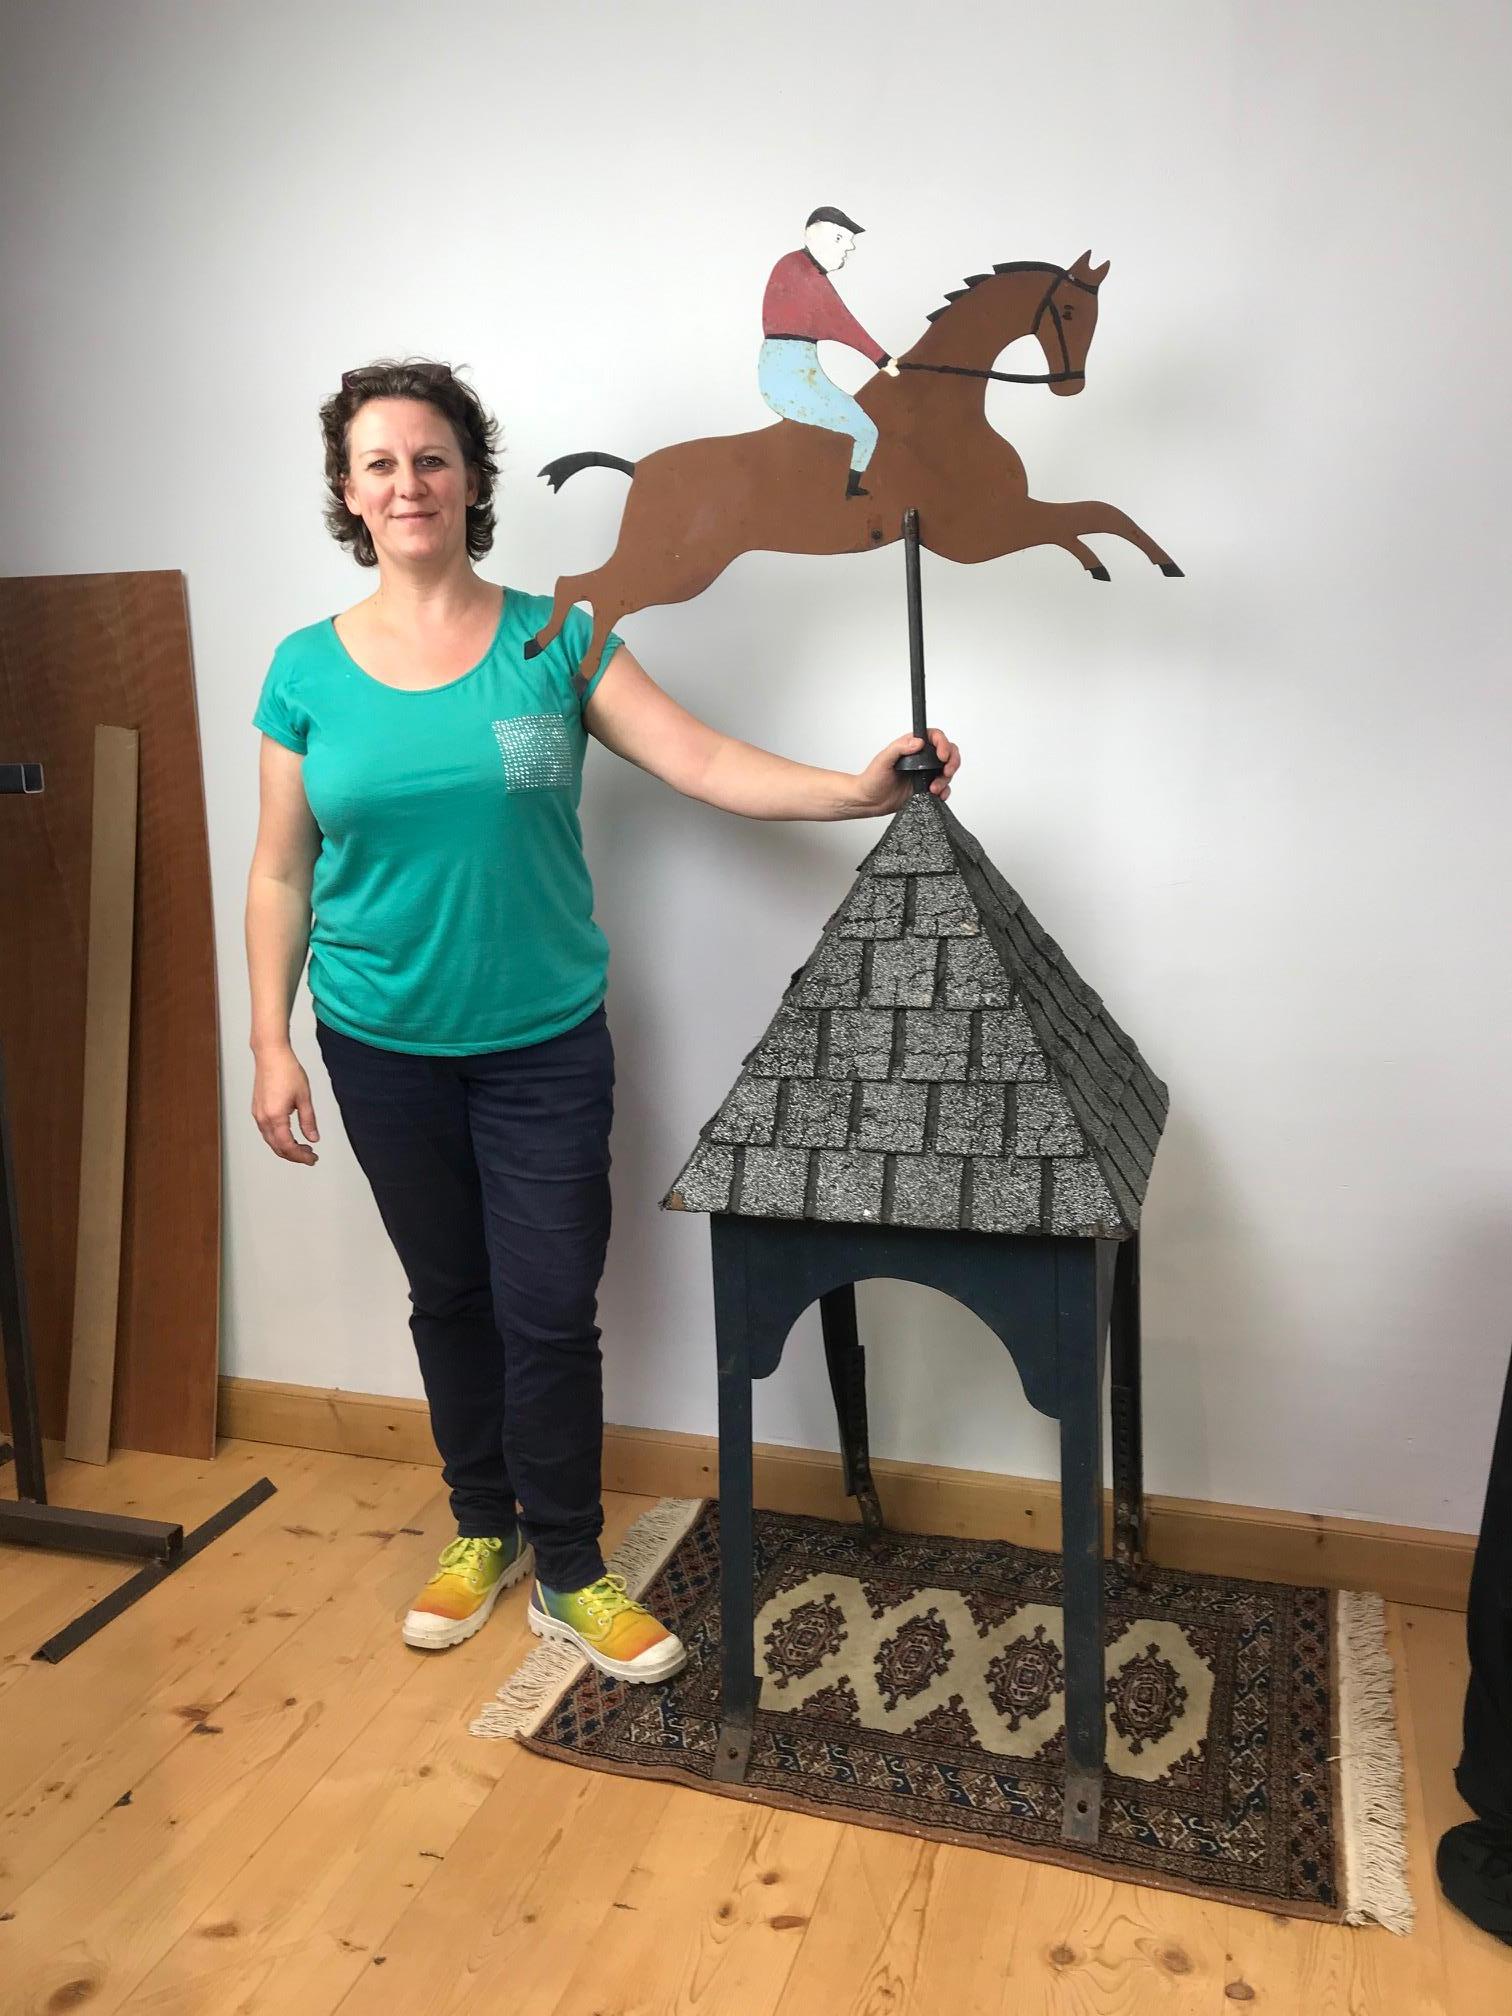 Vintage pointed roof with a weathervane in the shape of a horse with jockey rider. 
This jockey riding race horse is made from cut metal, is hand painted and double sided. 
This wind vane roof ornament is mounted on a pointed roof which is covered